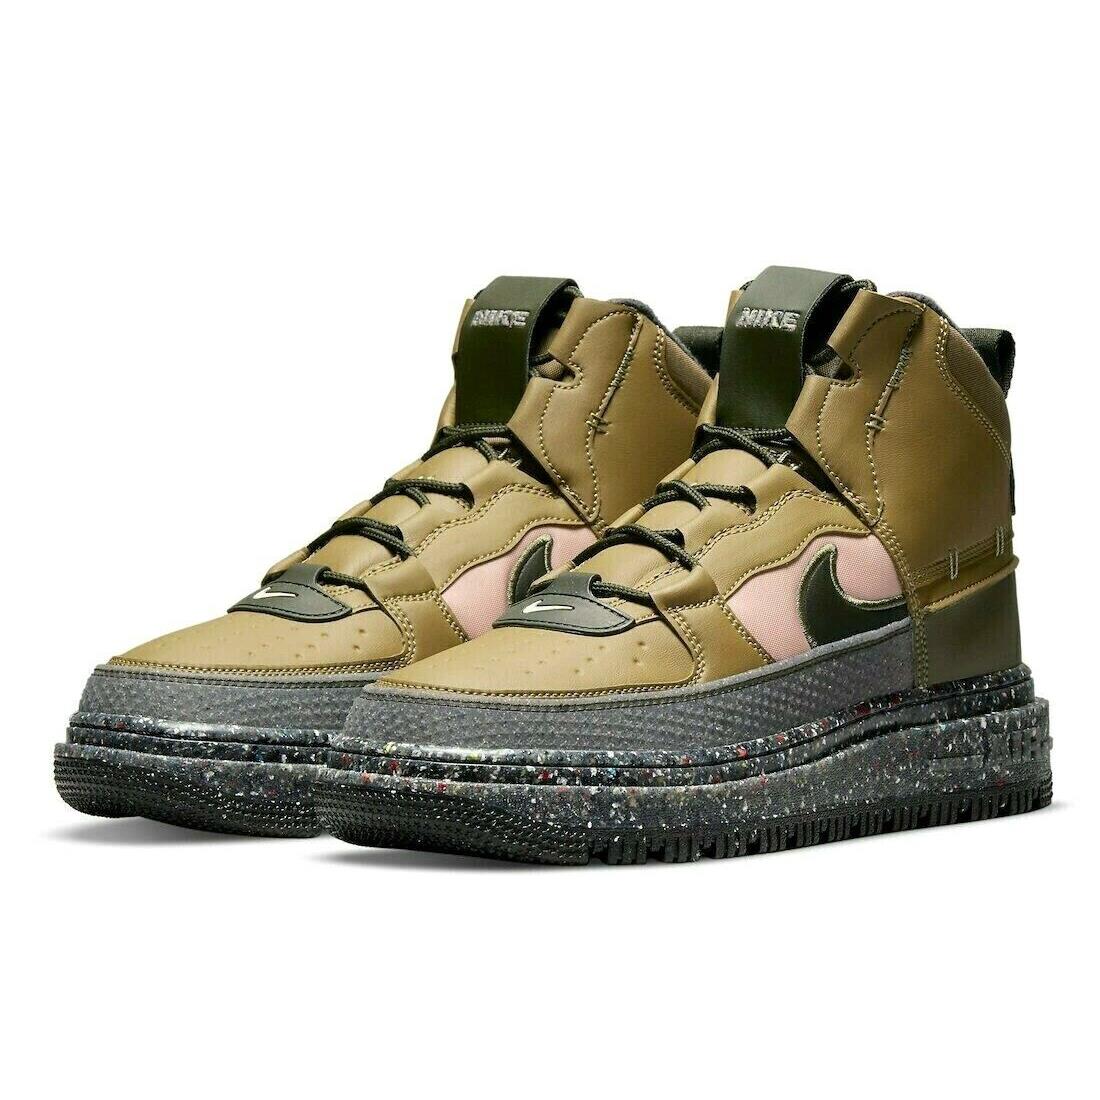 Nike Air Force 1 Boot NN Mens Size 6 Sneaker Shoes DD0747 300 Crater Brown